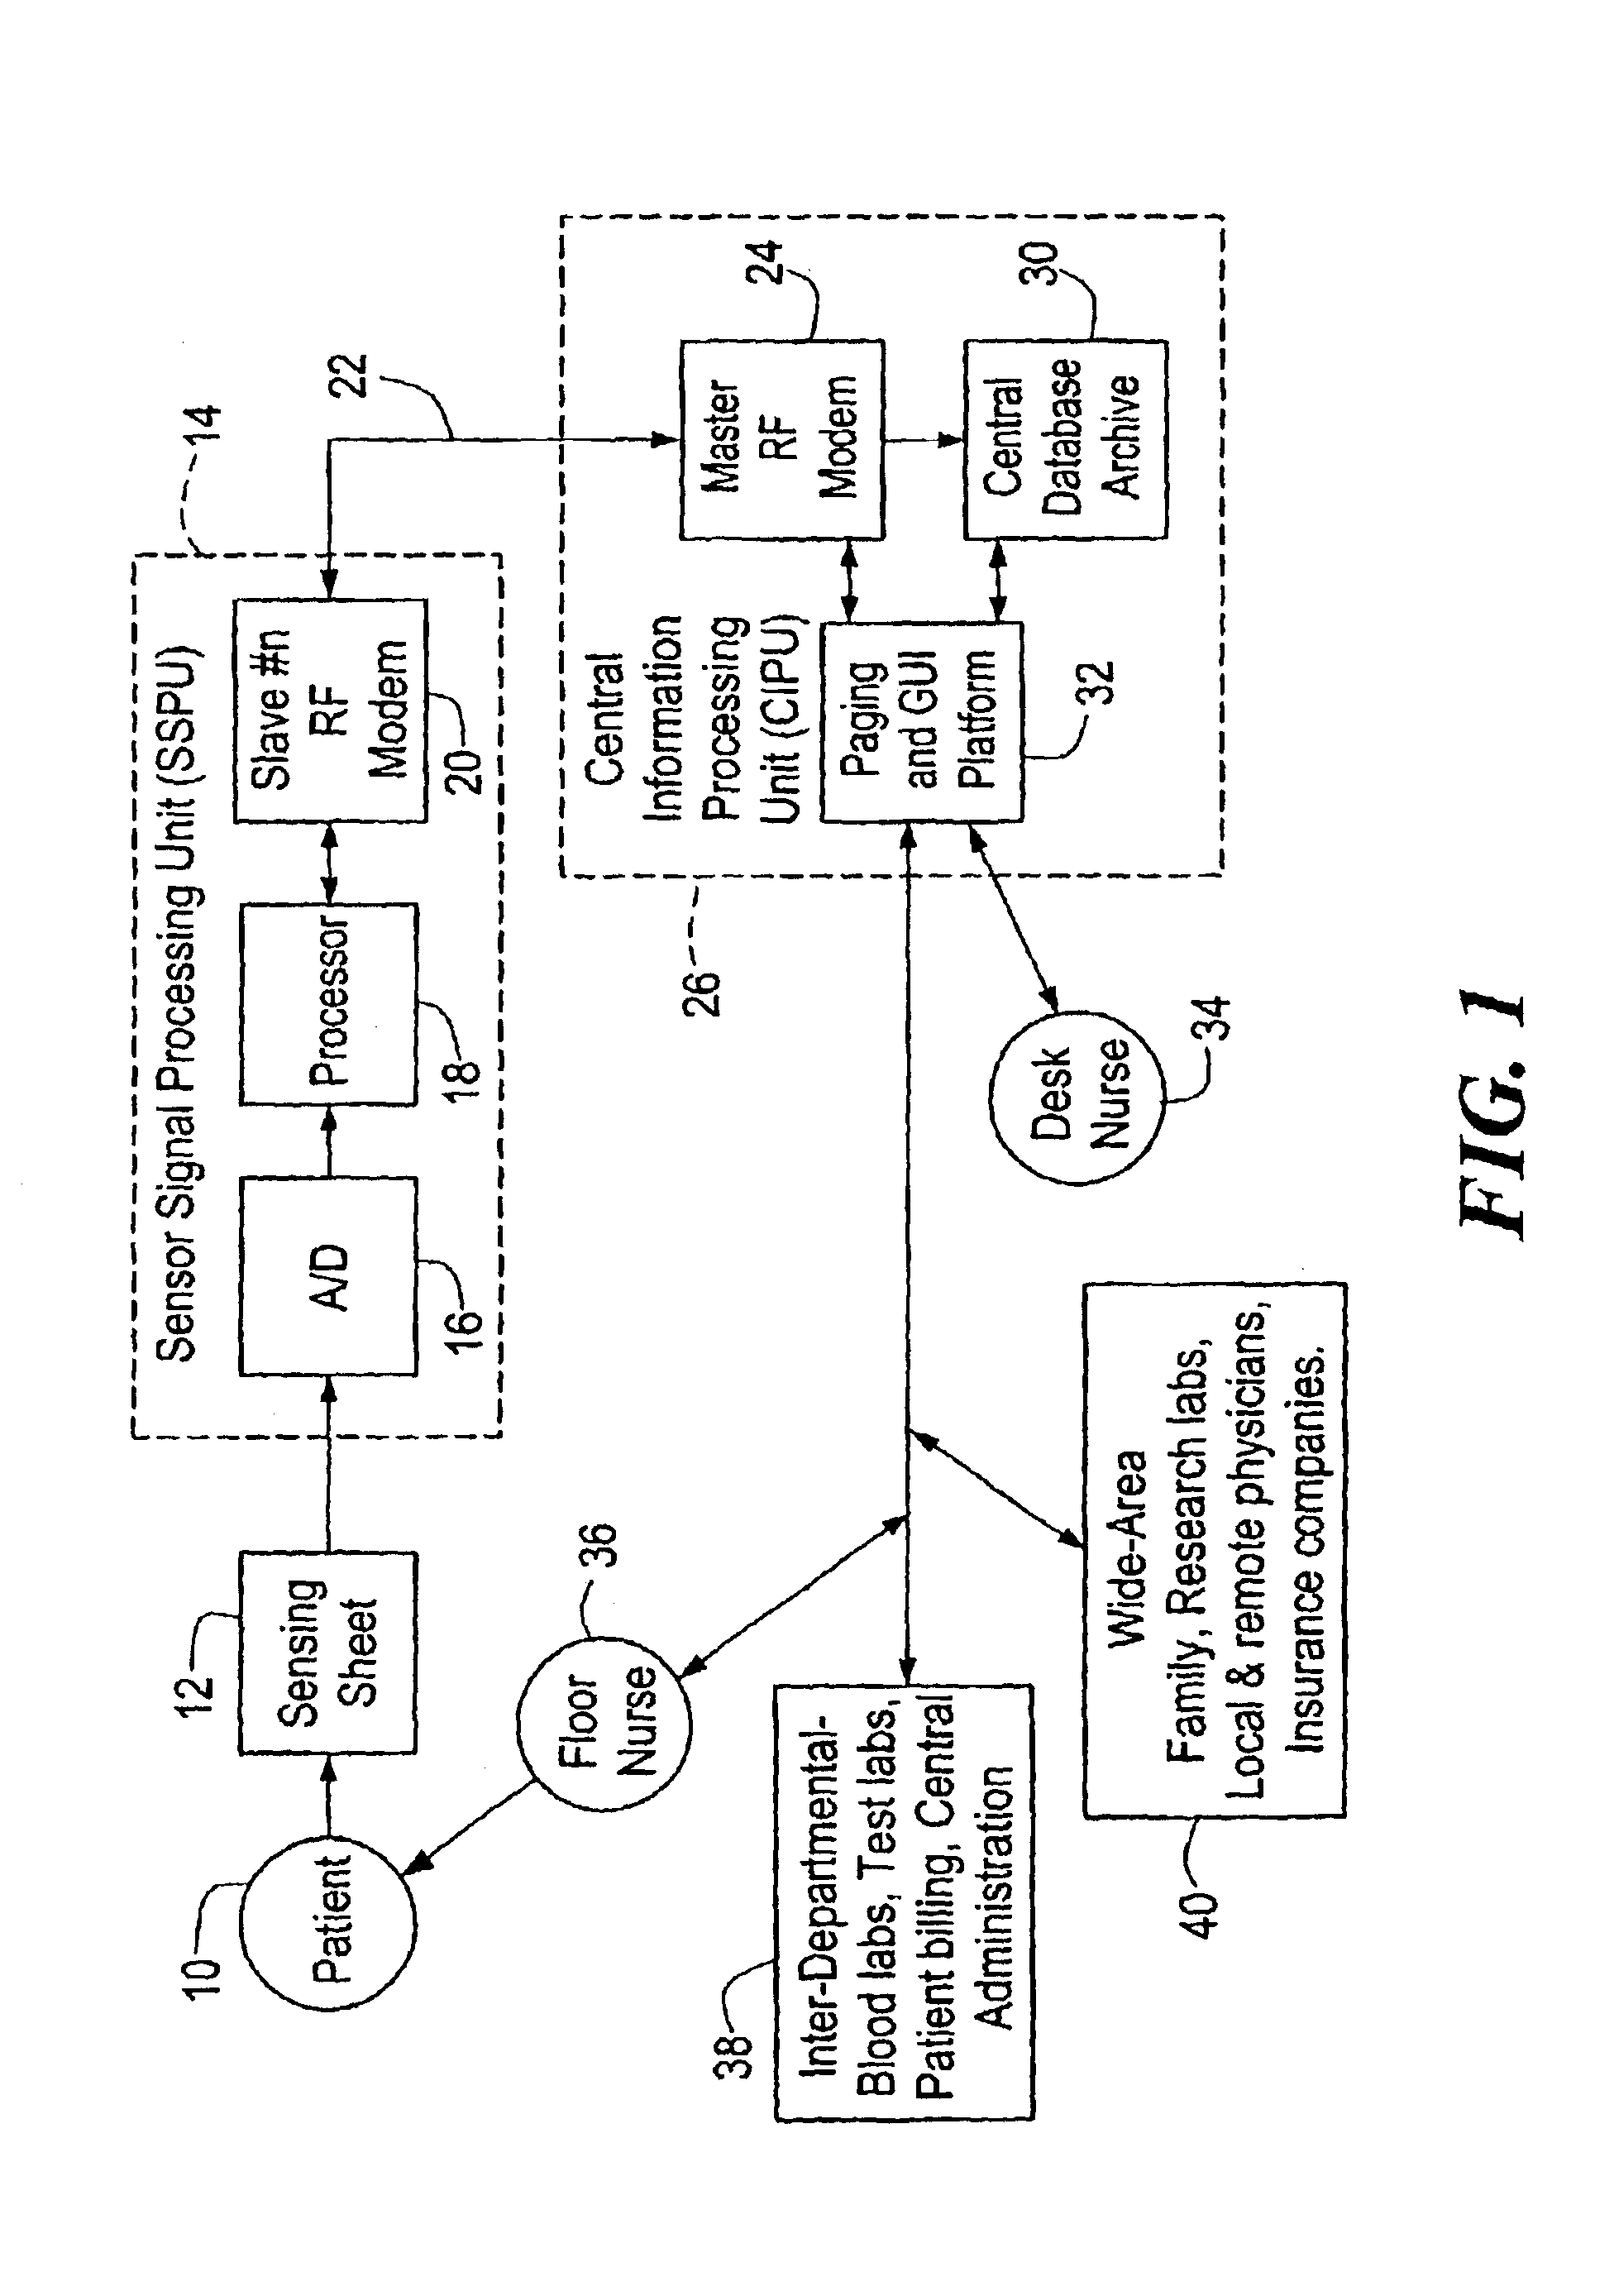 Patient monitoring system employing array of force sensors on a bedsheet or similar substrate